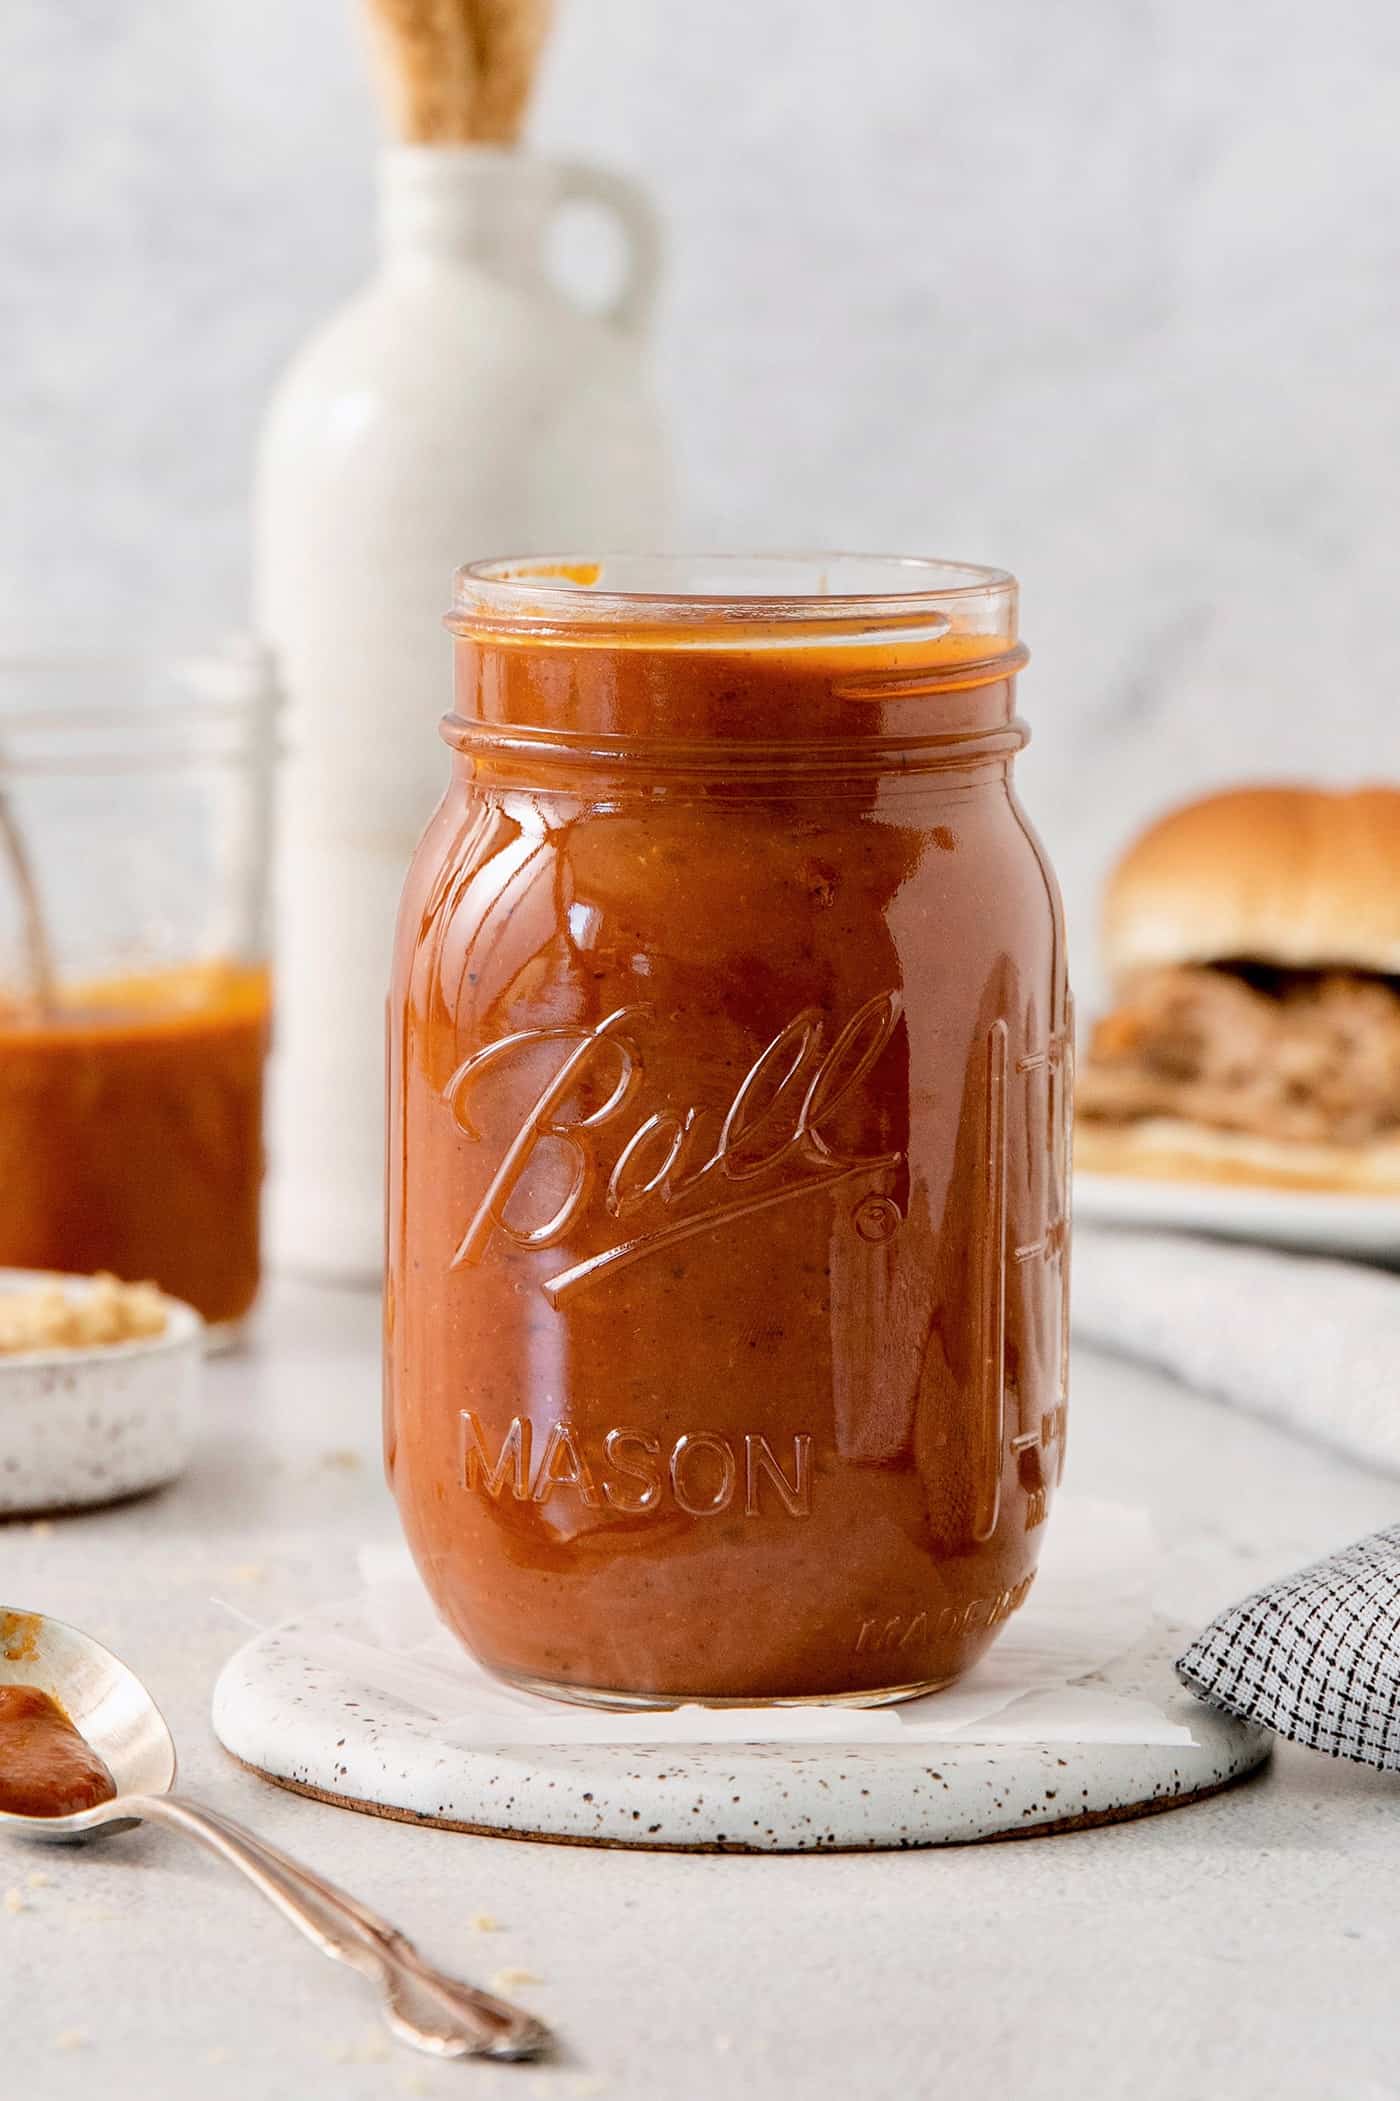 barbecue sauce in a jar